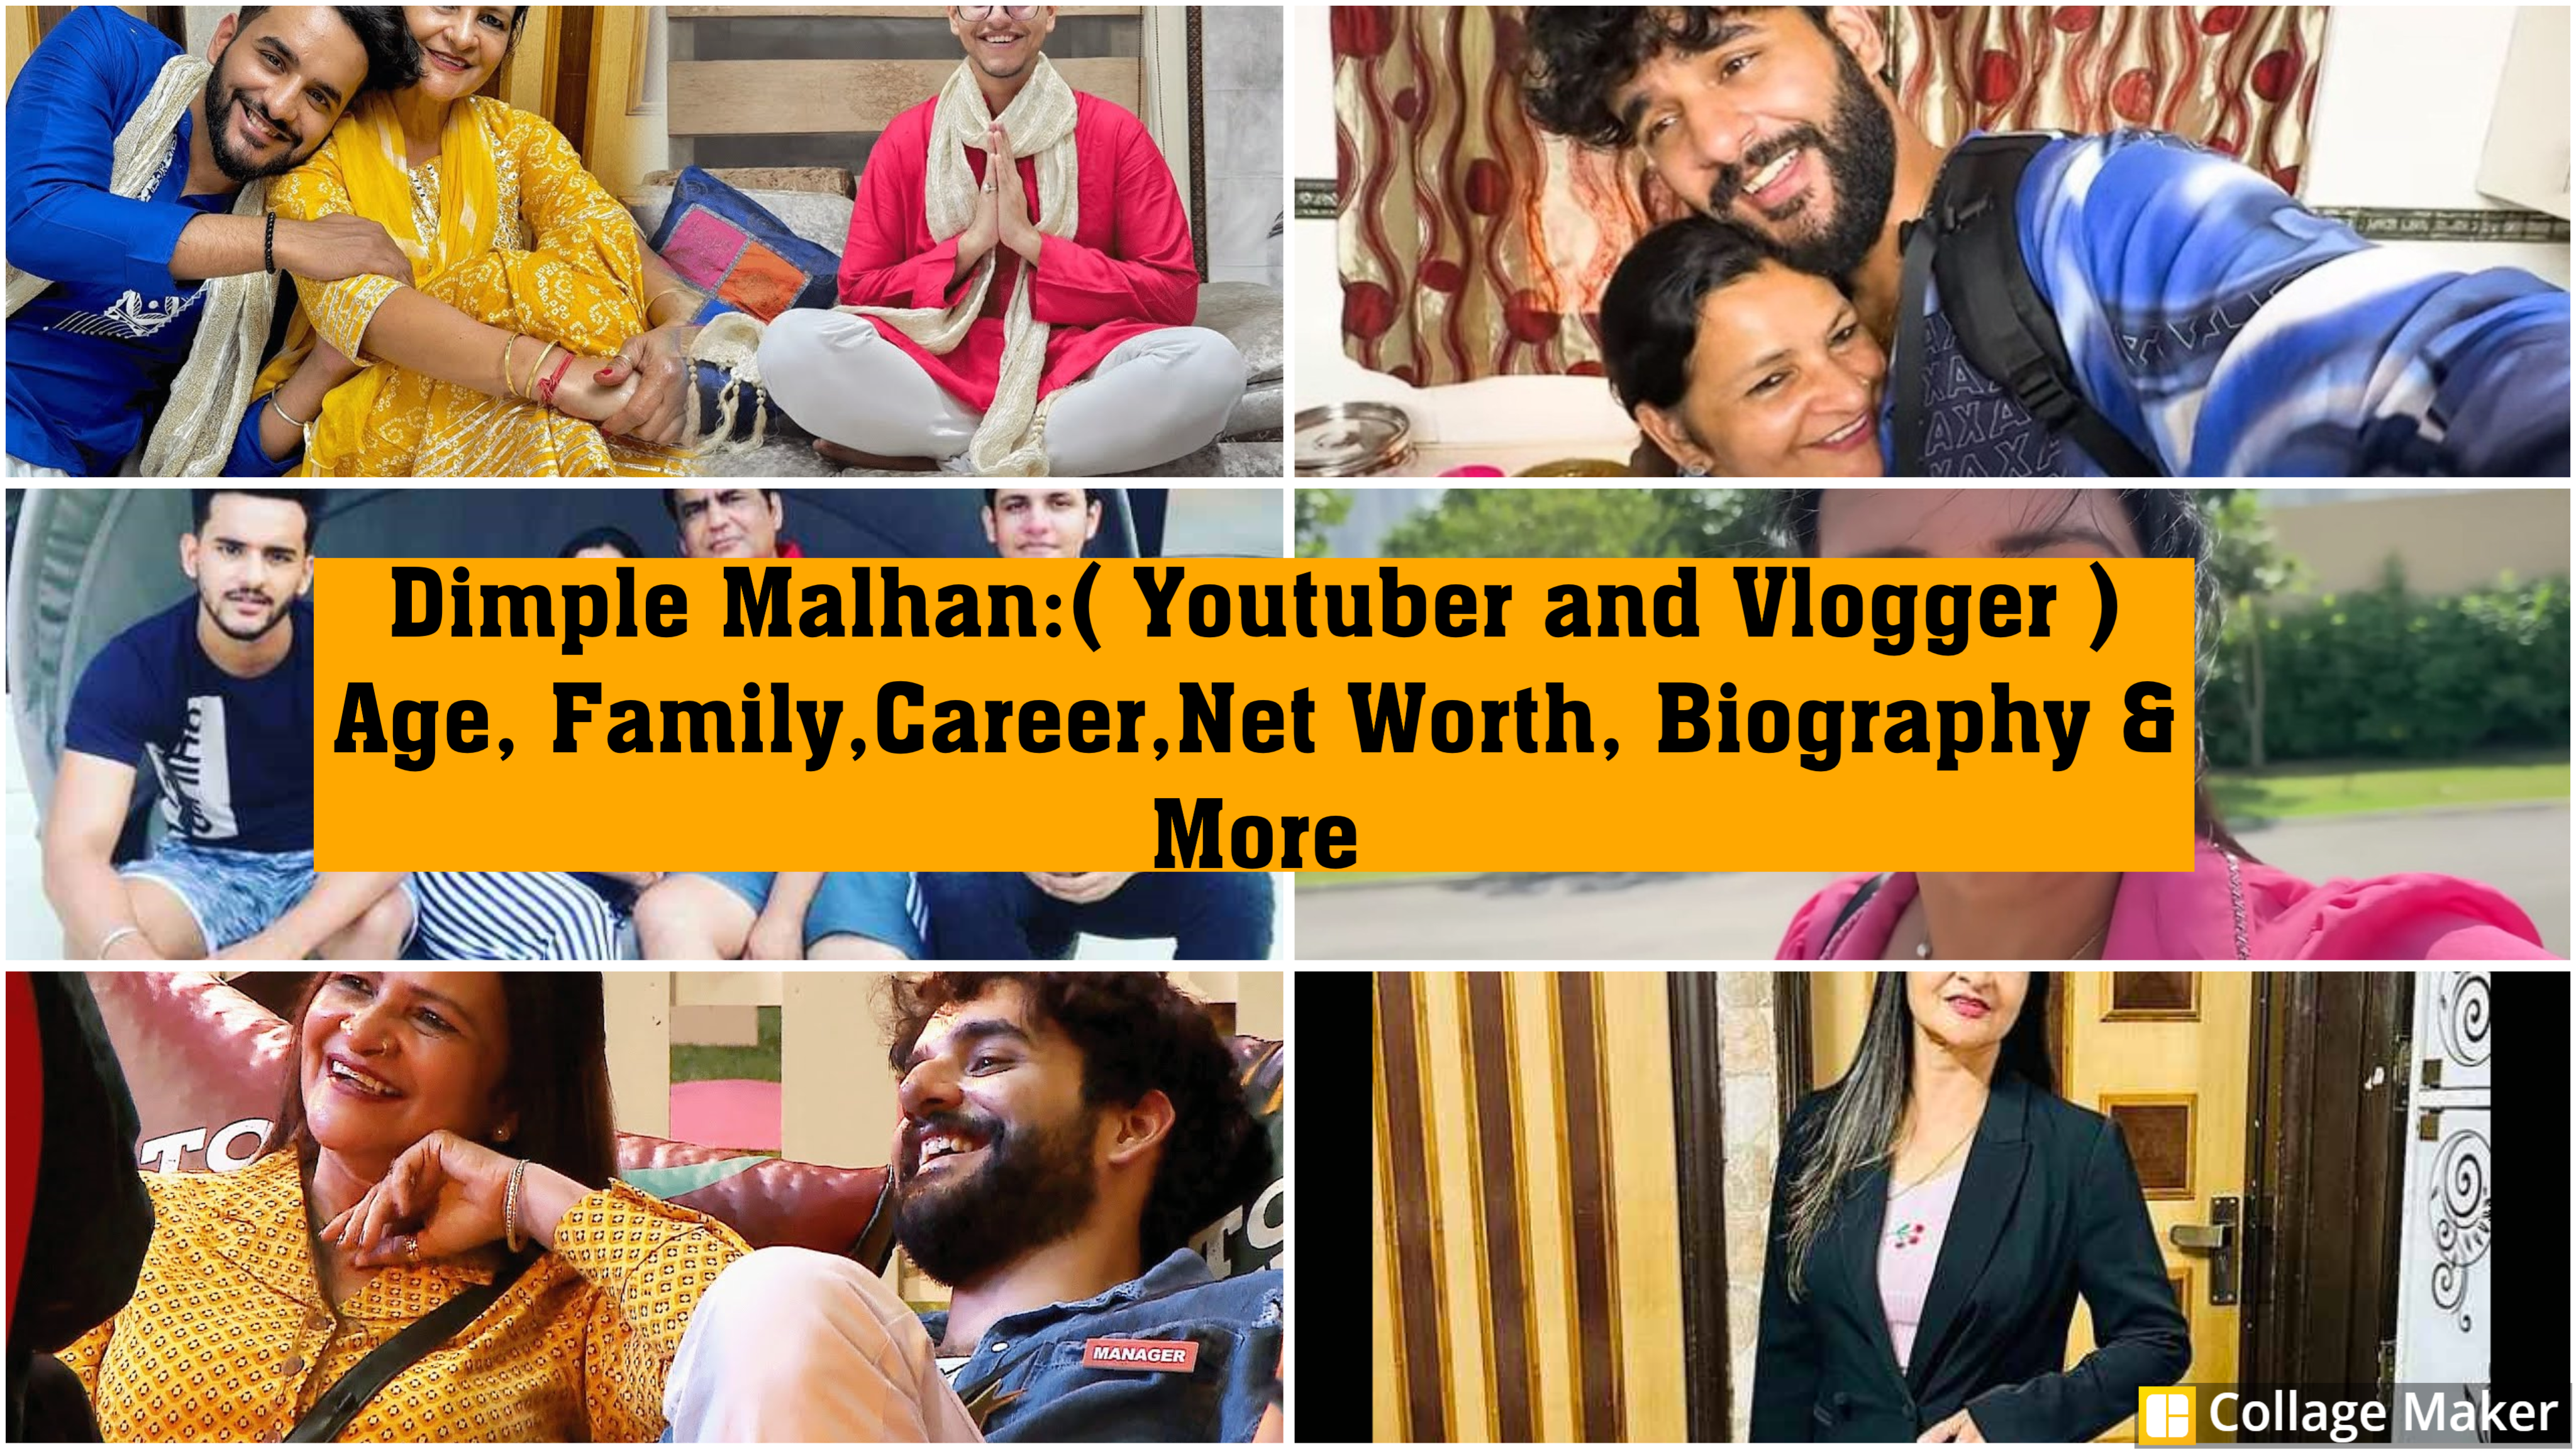 You are currently viewing Dimple Malhan:( Youtuber and Vlogger )  Age, Family,Career,Net Worth, Biography & More